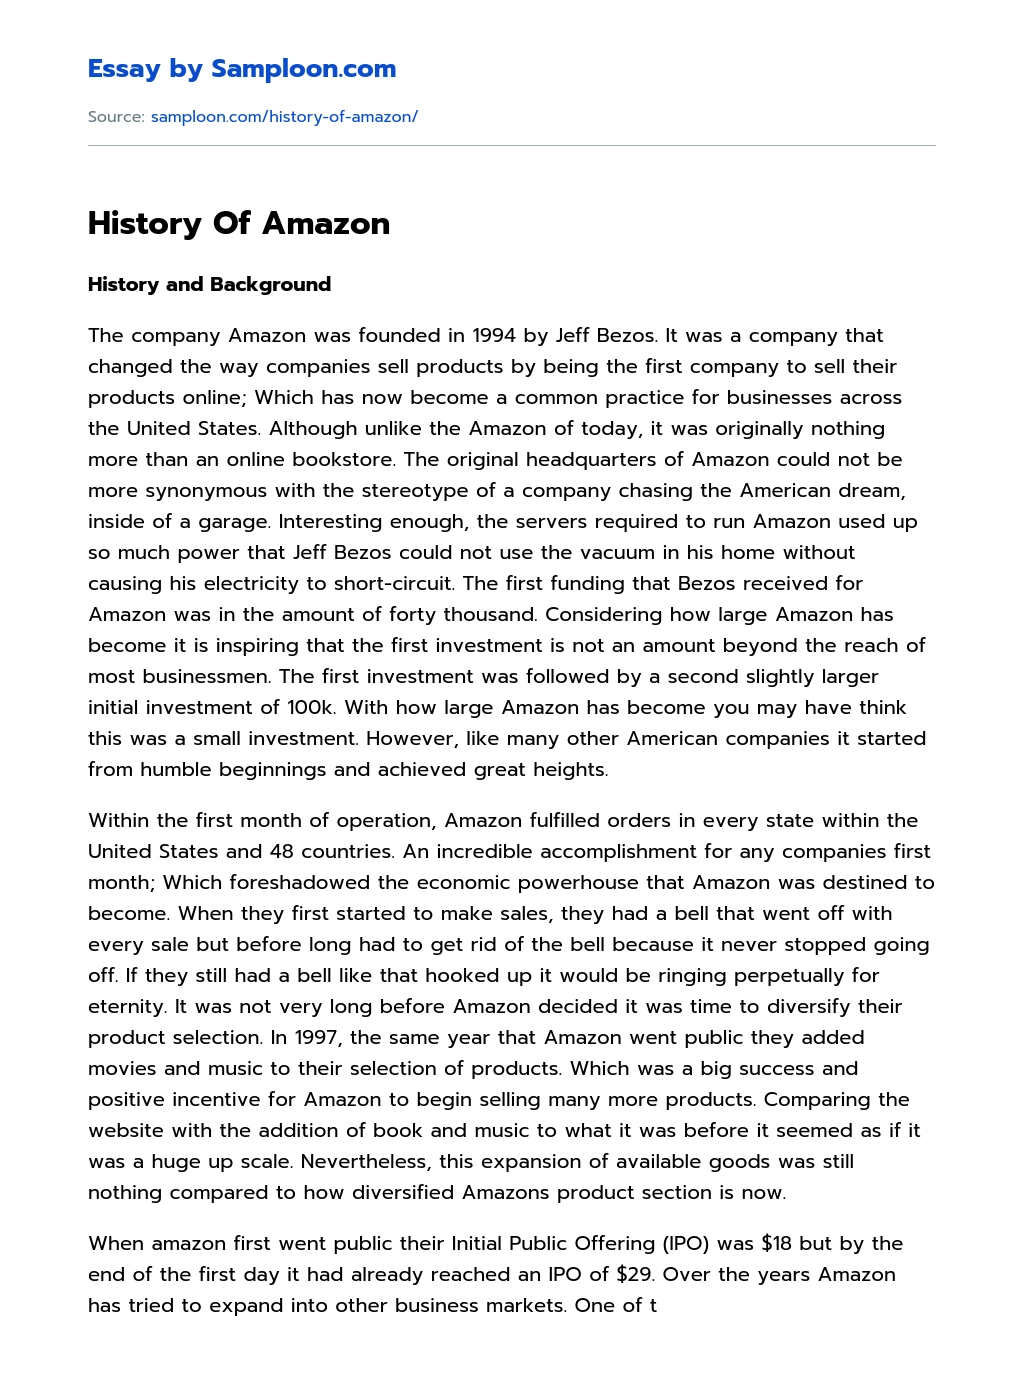 History Of Amazon Research Paper essay